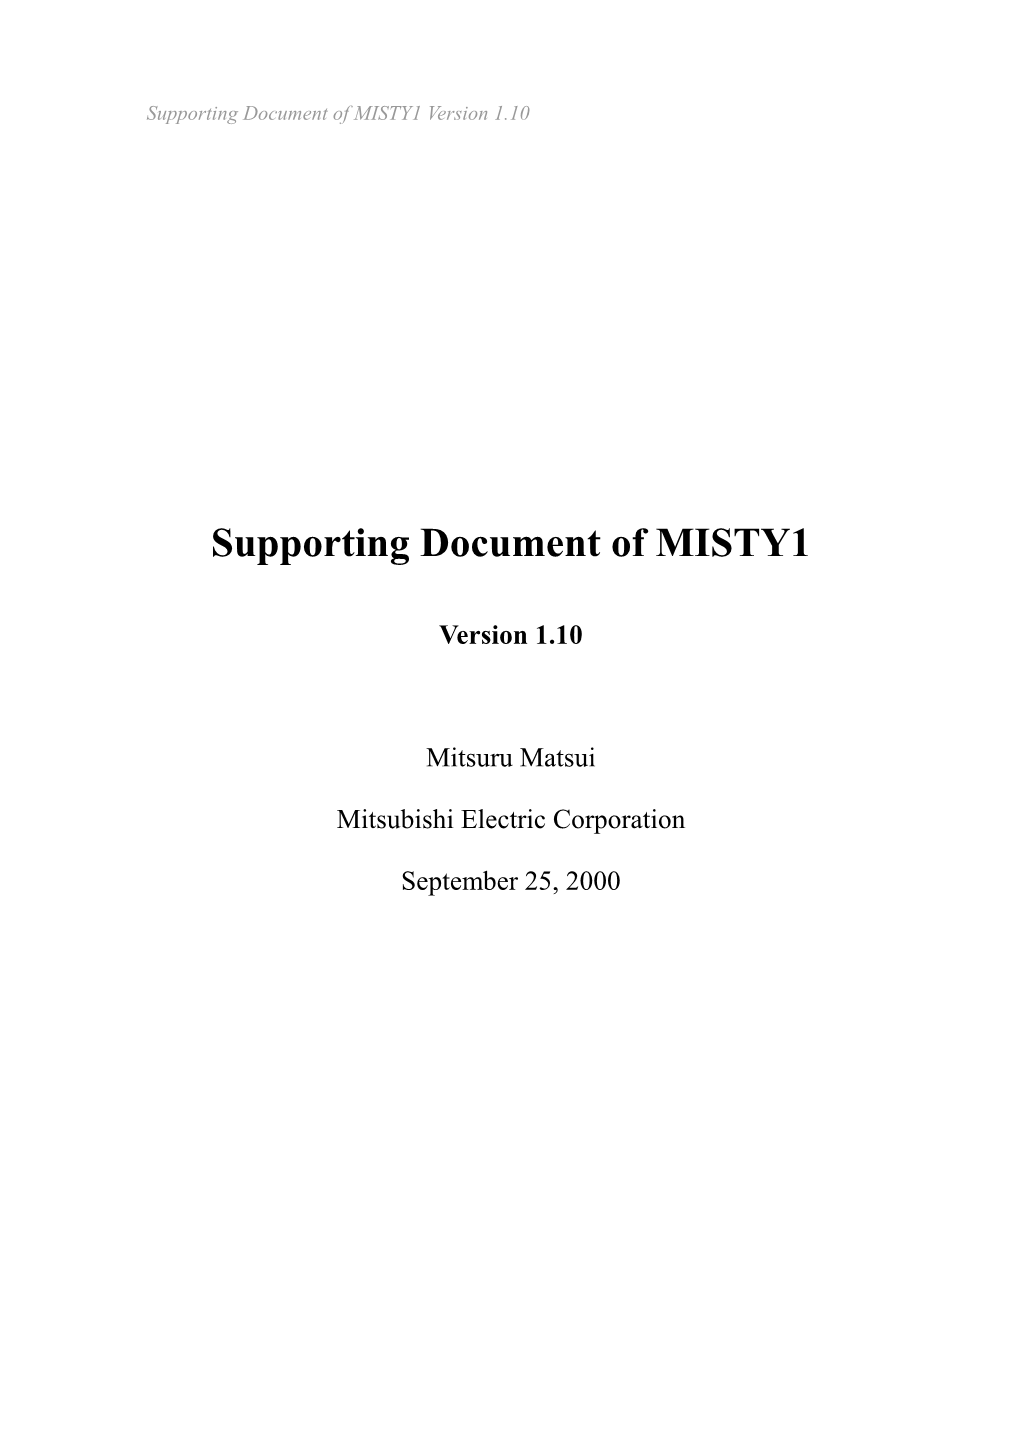 Supporting Document of MISTY1 Version 1.10